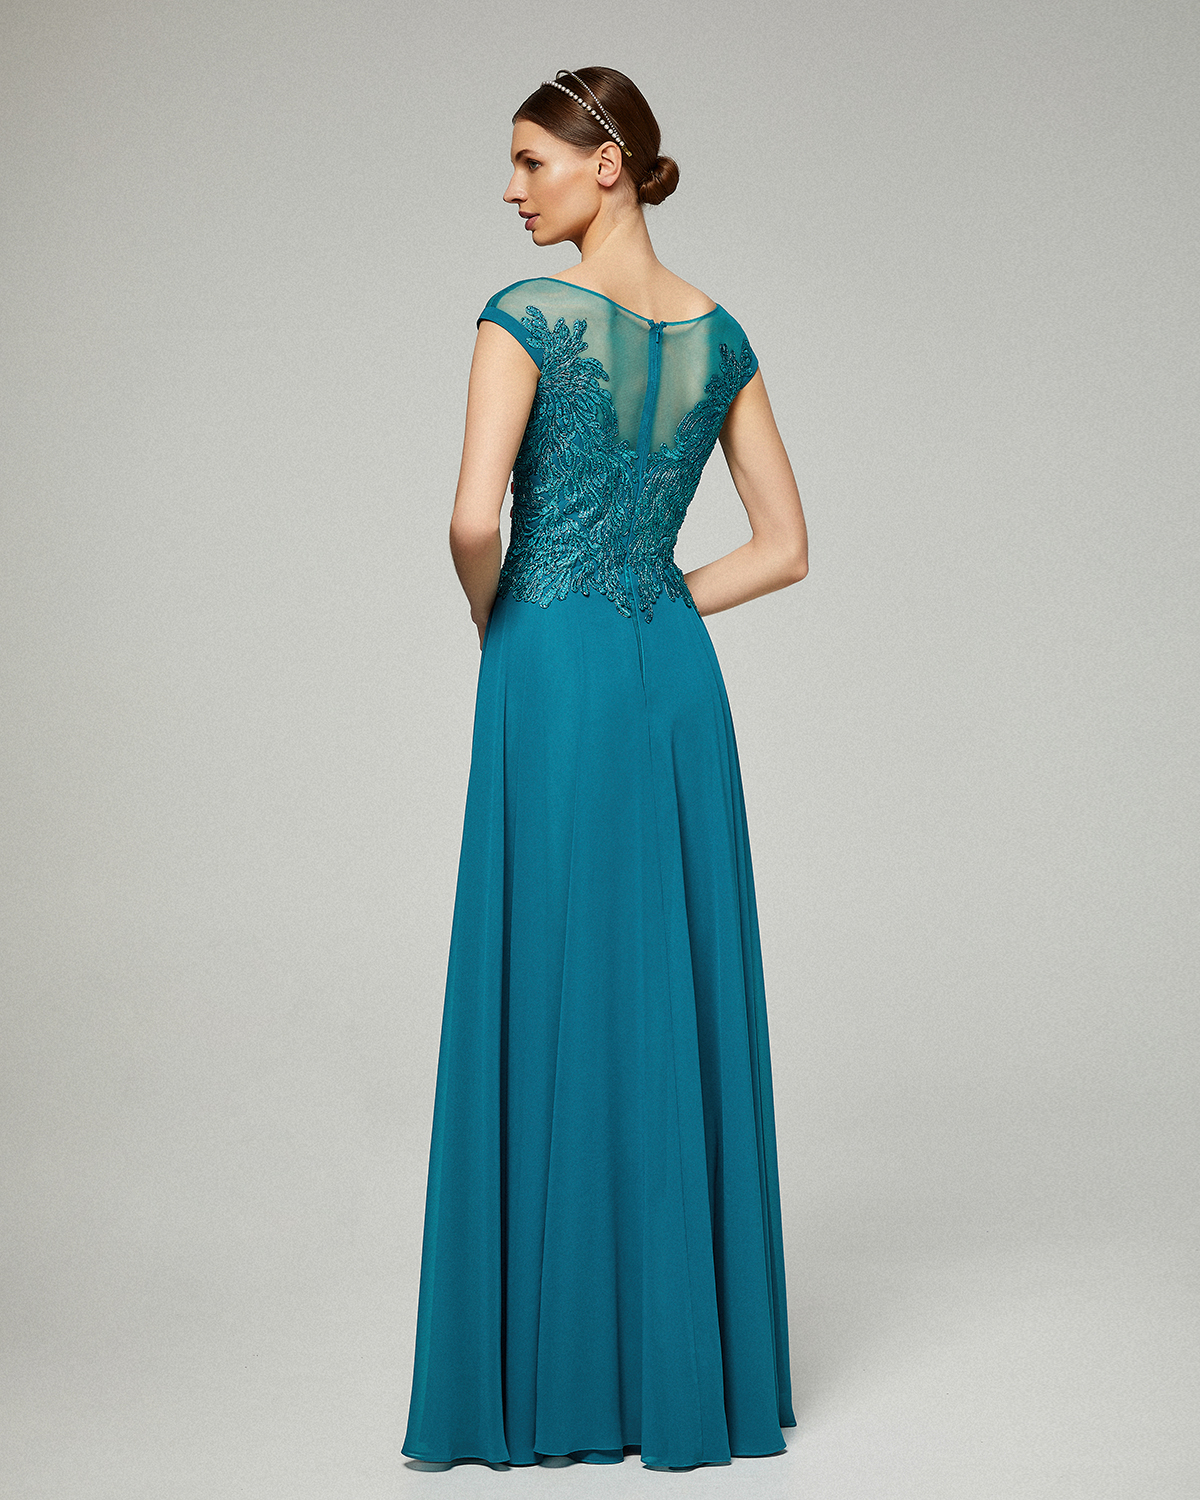 Classic Dresses / Long dress with chiffon fabric,  beaded top and short sleeves